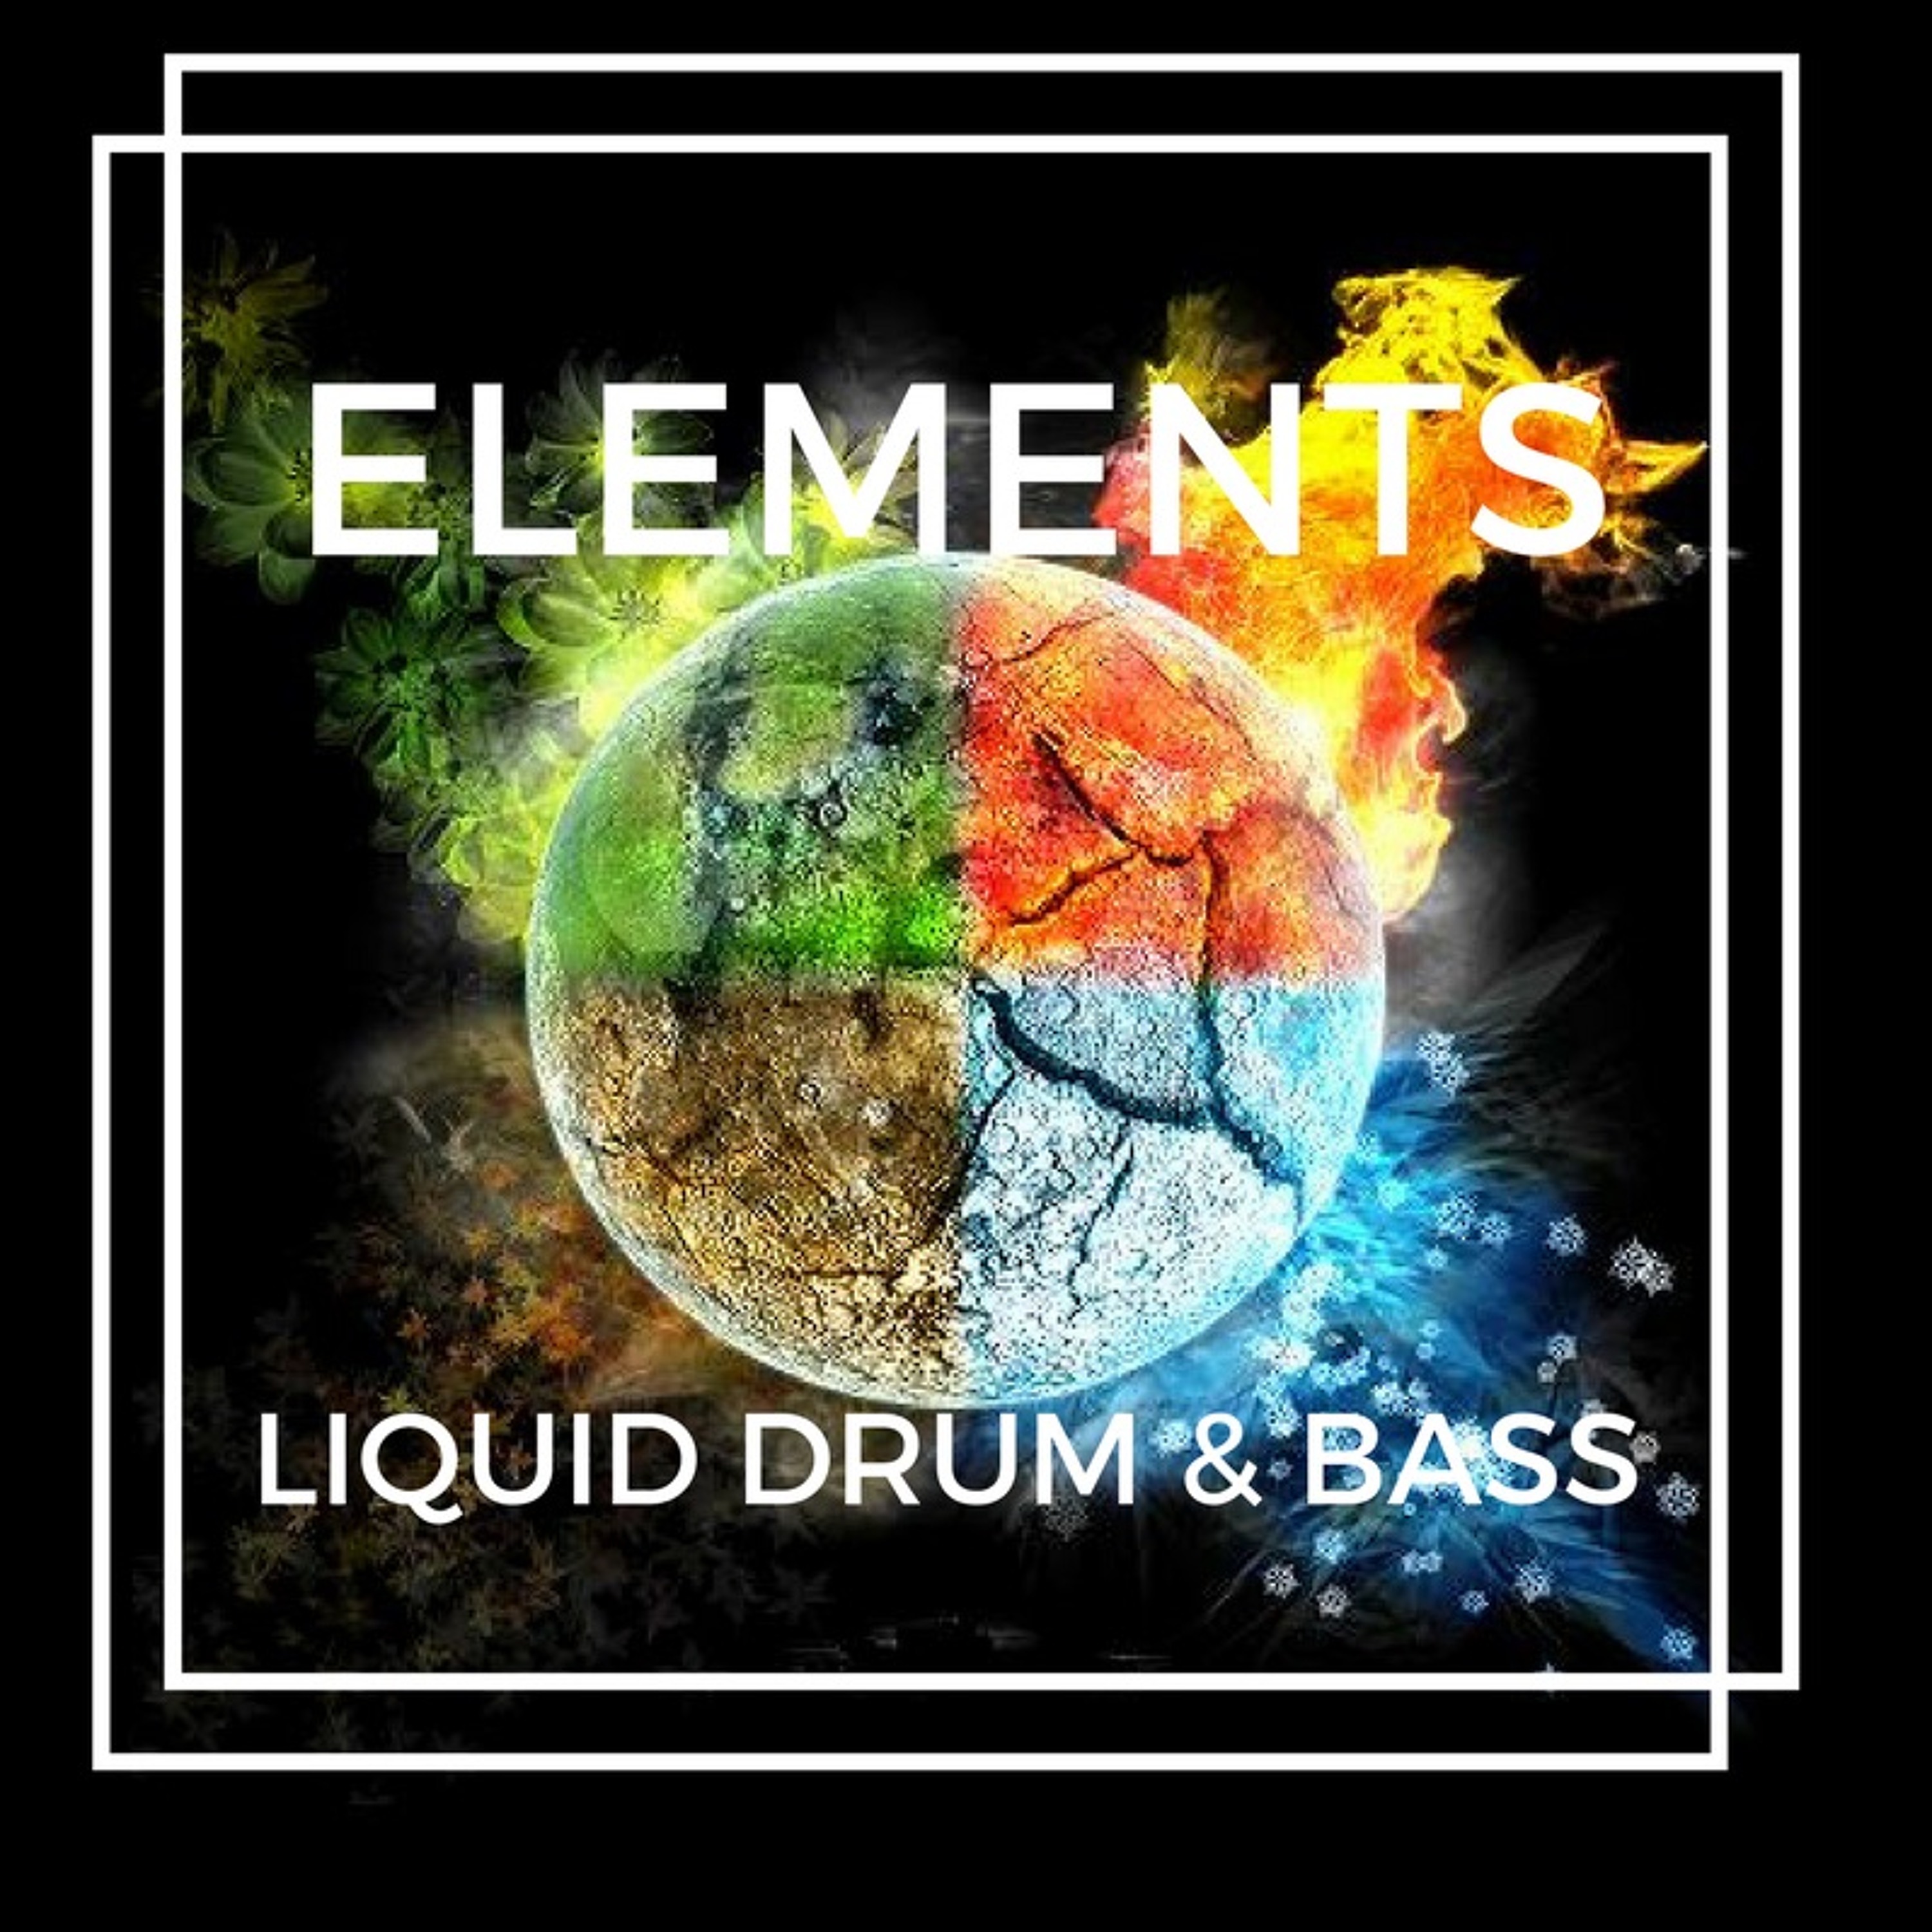 Elements - A Liquid Drum & Bass Podcast EP 12: Live @ warm up for Marcus Intalex 17.03.17 Artwork